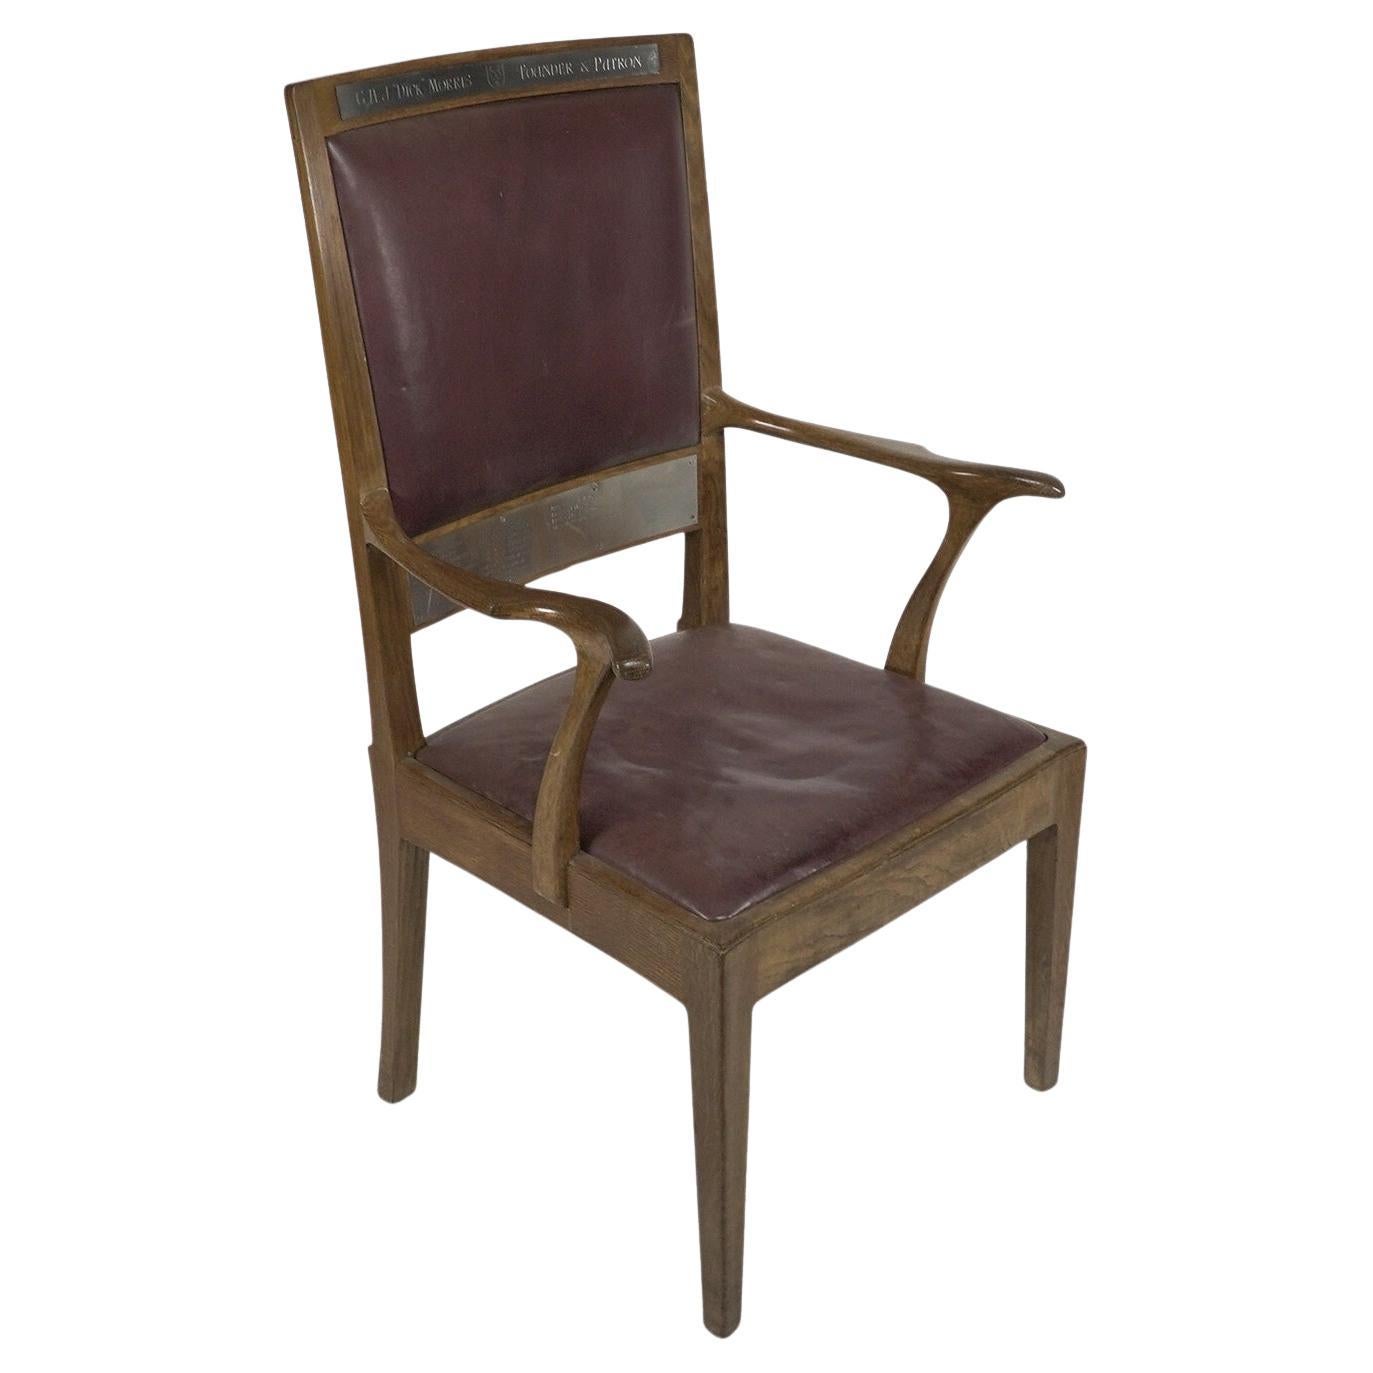 Edward Barnsley. Commissioned by G H J Morris An Arts & Crafts Cotswold armchair